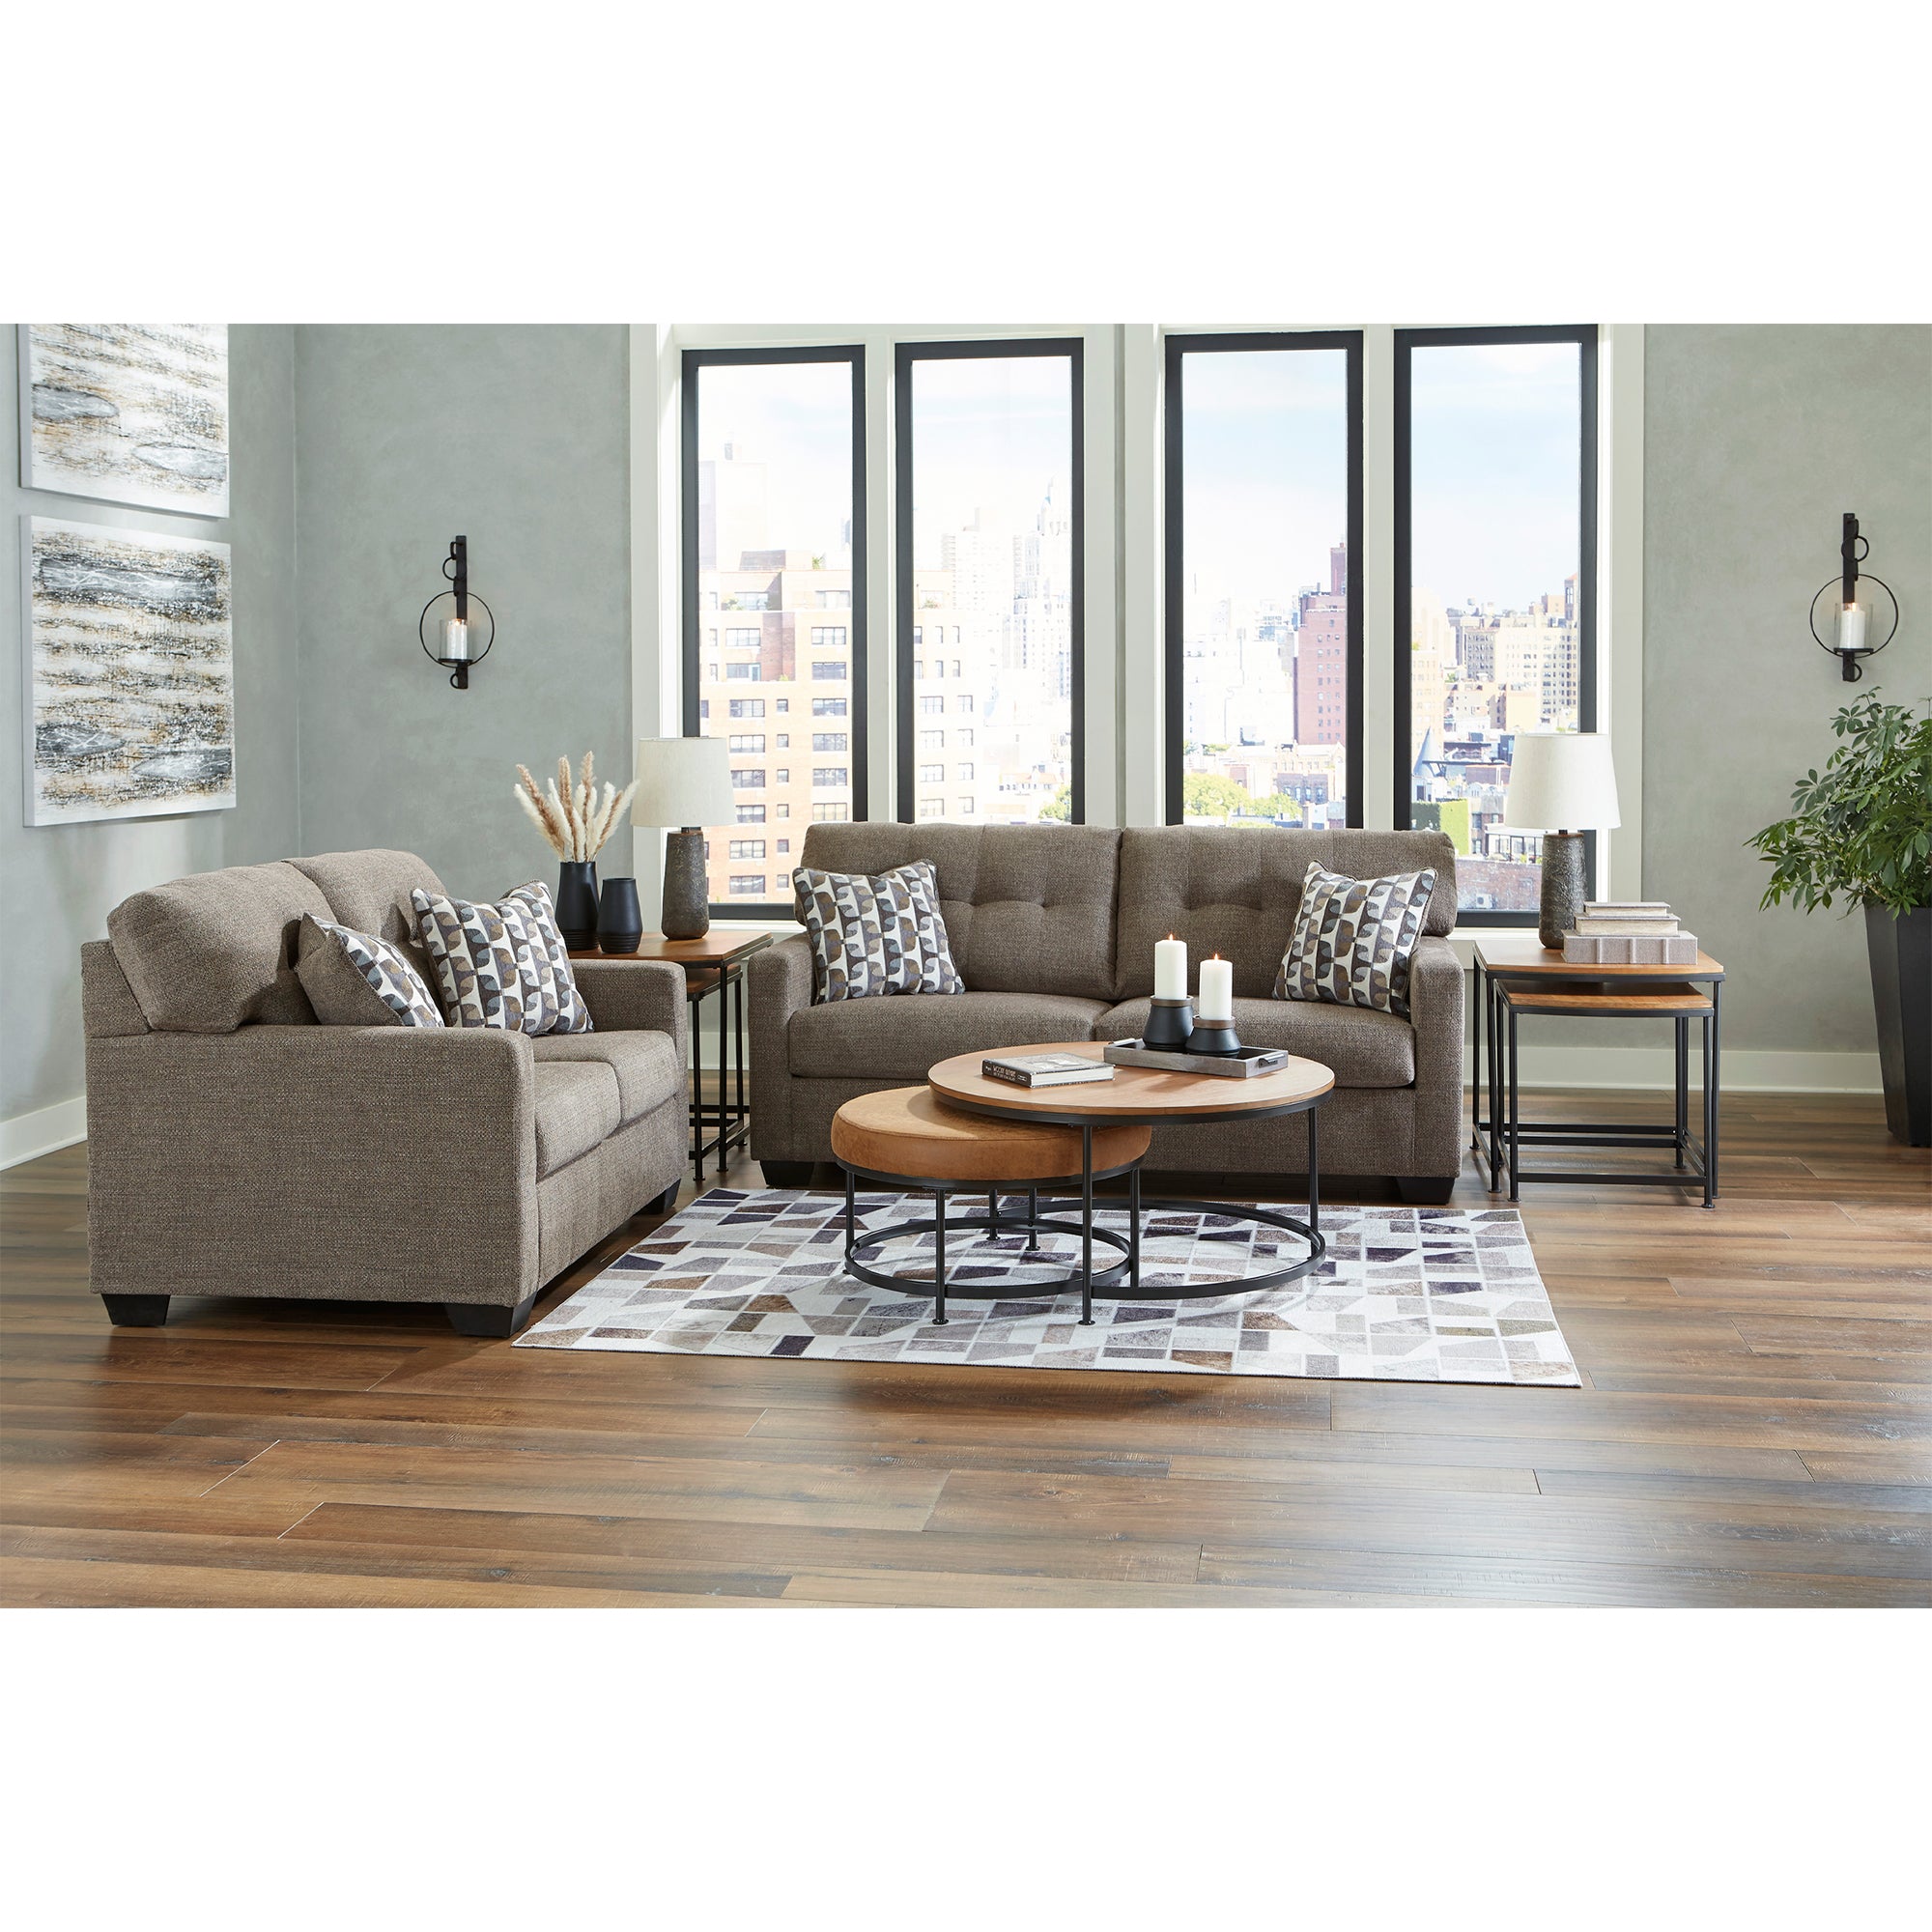 Stylish Mahoney Sofa and Loveseat combo in chocolate, designed for modern elegance and practicality